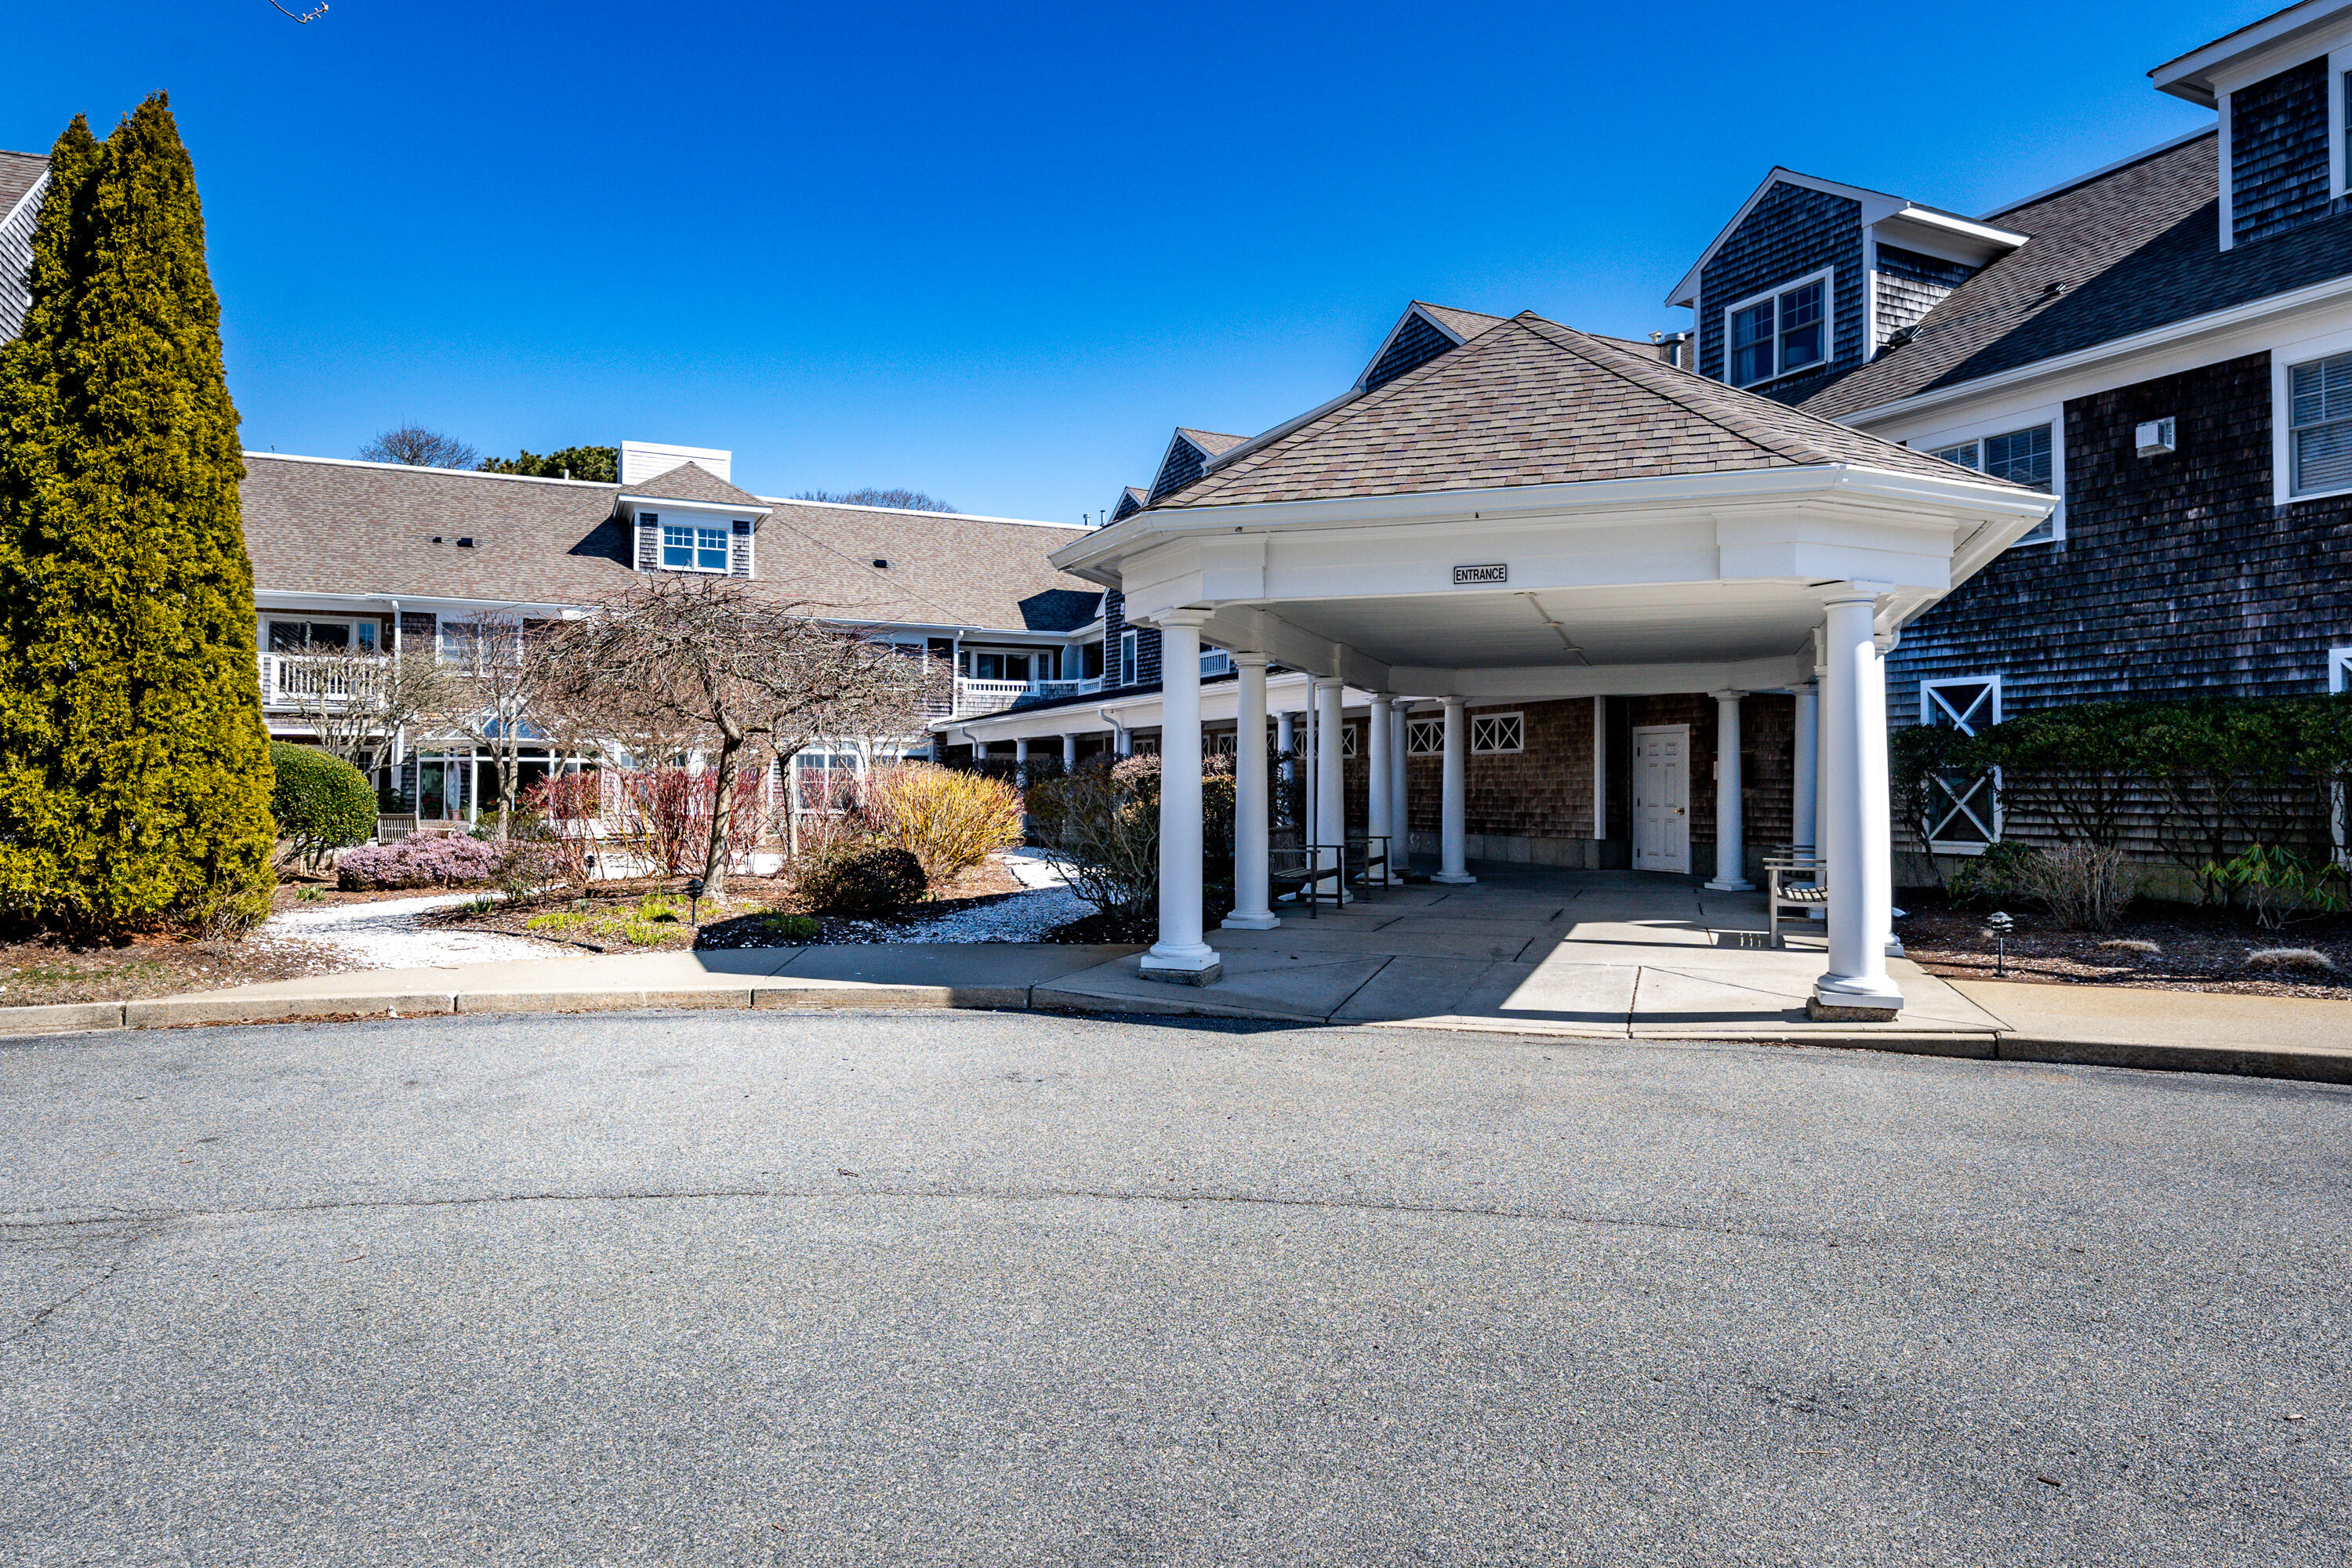 912 Main Street # X306, Chatham, Massachusetts 02633, 2 Bedrooms Bedrooms, 6 Rooms Rooms,2 BathroomsBathrooms,Residential,For Sale,Park Place,912 Main Street # X306,22401275